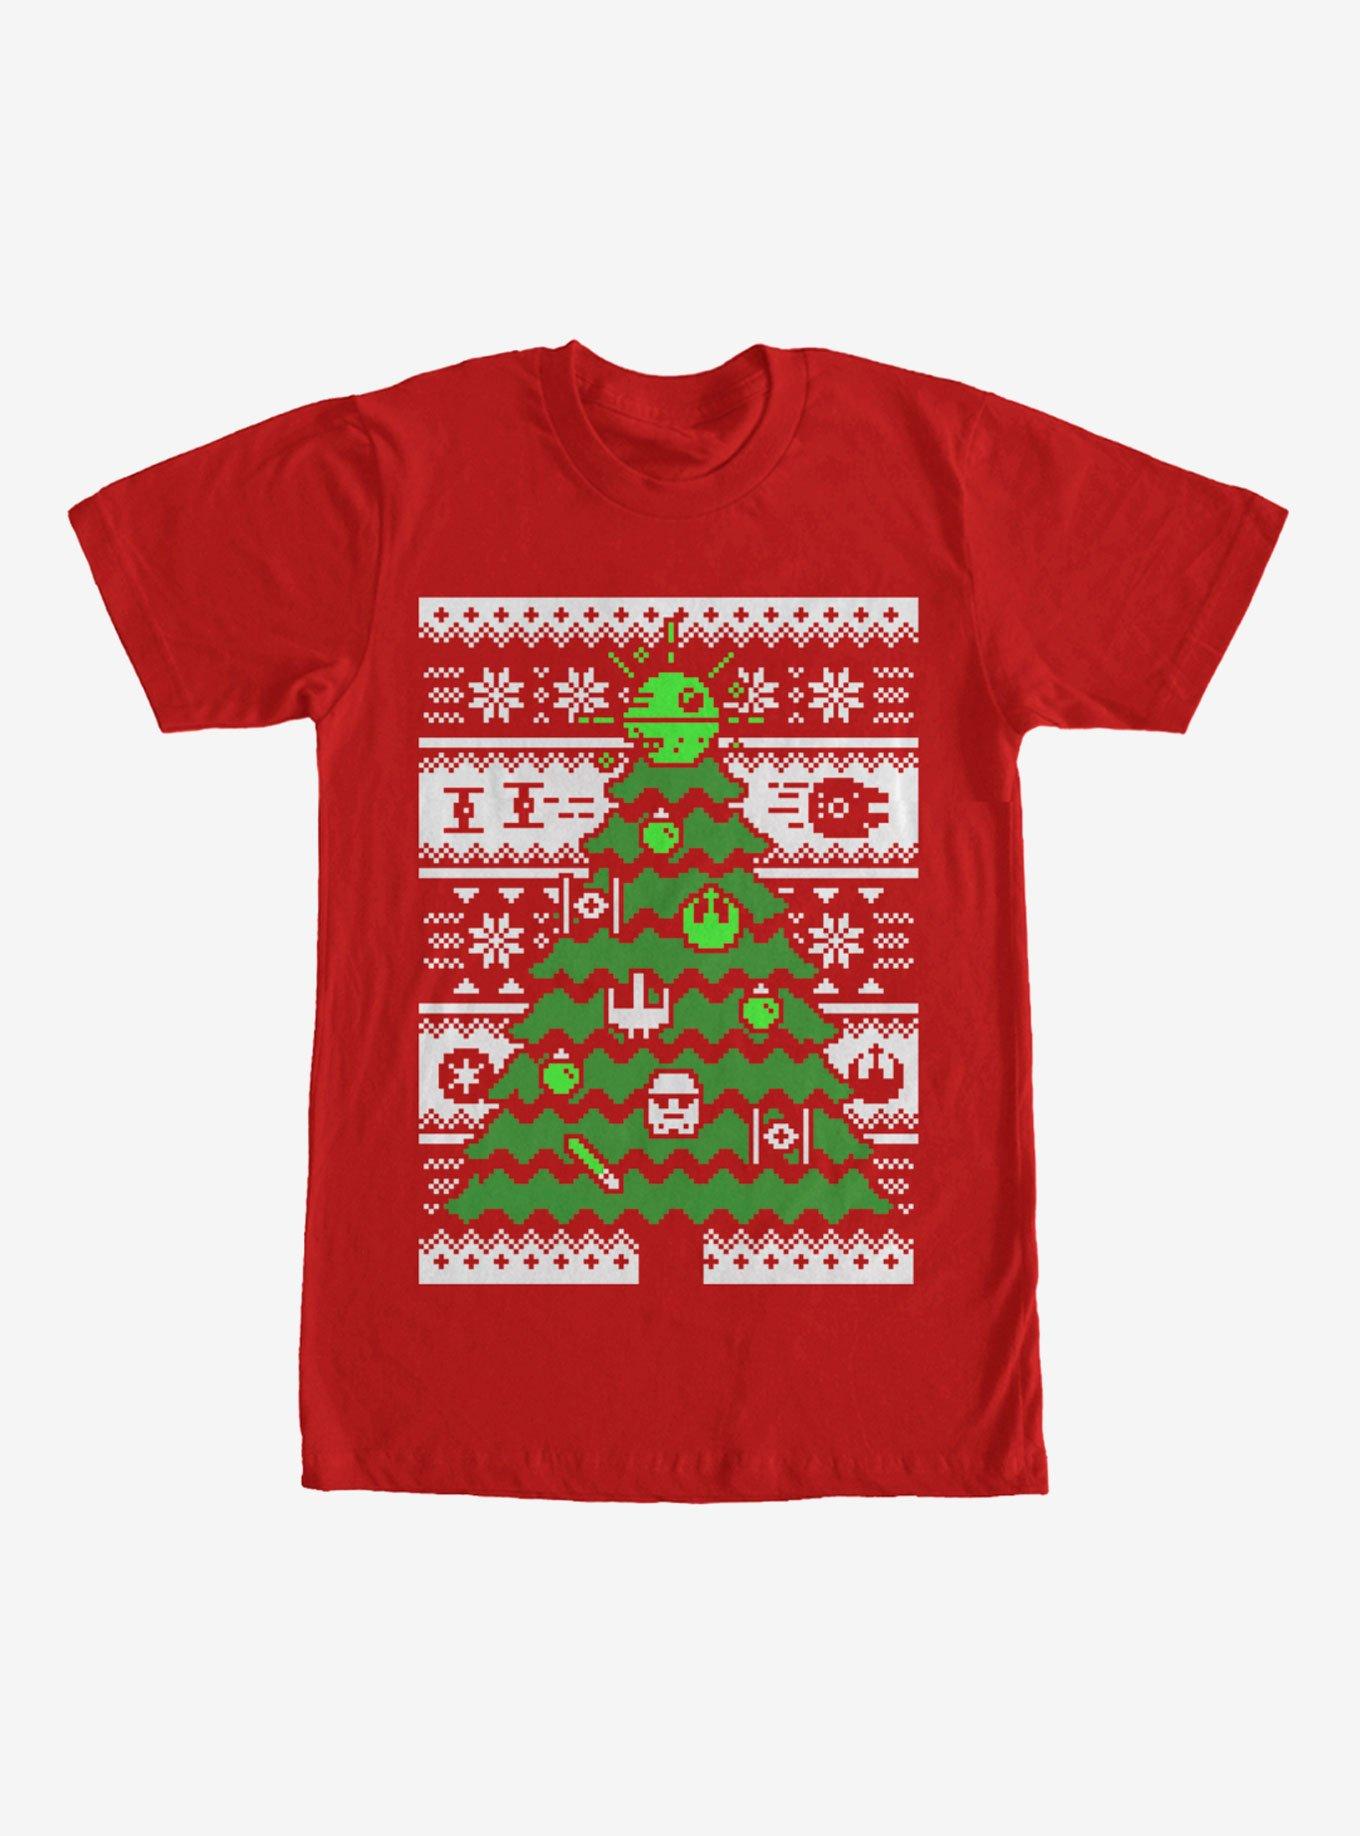 Star Wars Ugly Christmas Sweater Tree T-Shirt - RED | Hot Topic